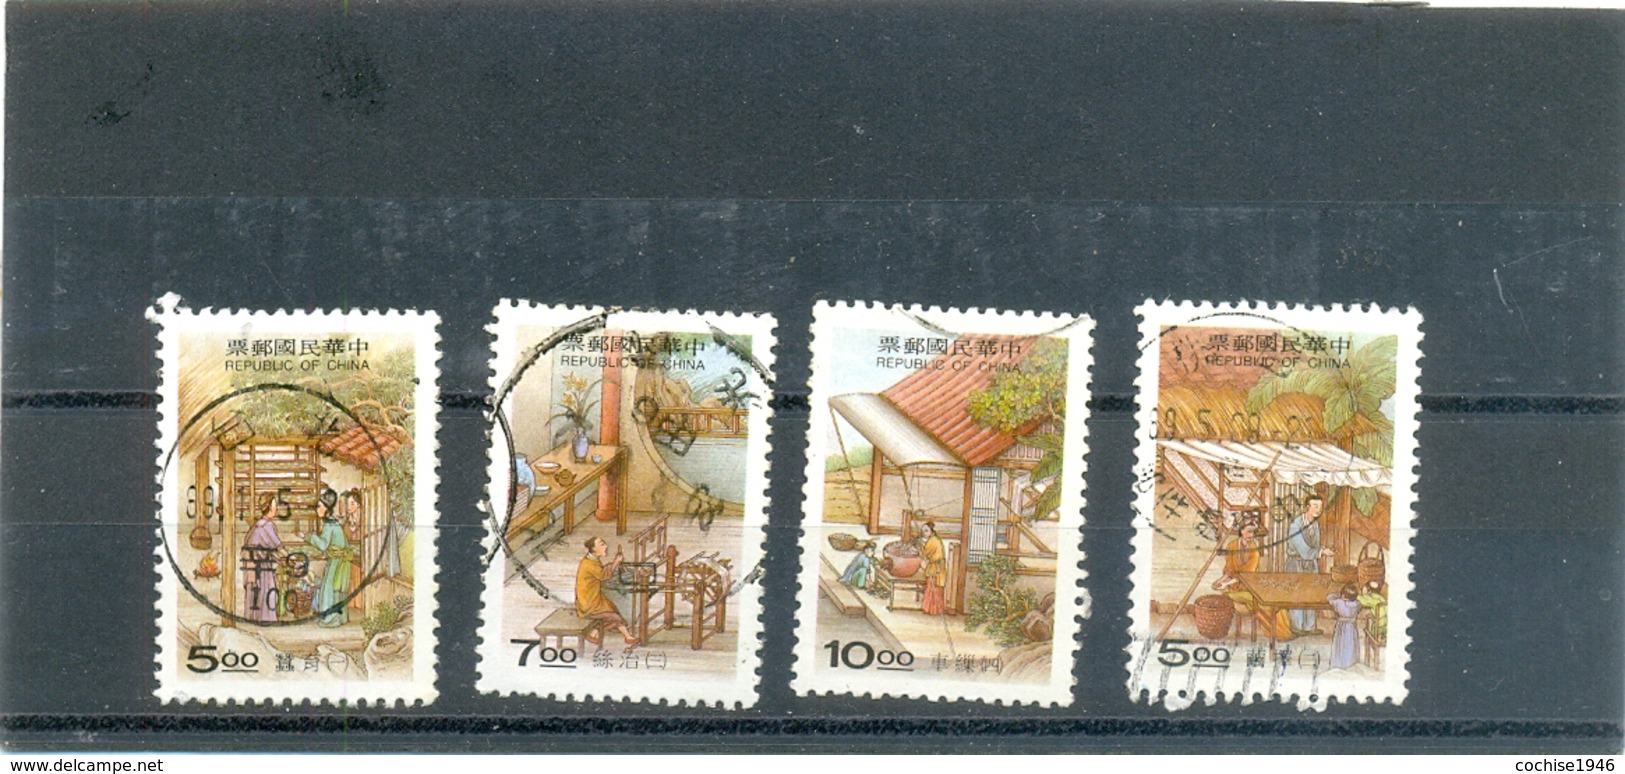 1997 FORMOSE Y & T N° 2441 - 2442 - 2443 - 2444  ( O ) Les 4 Timbres - Used Stamps